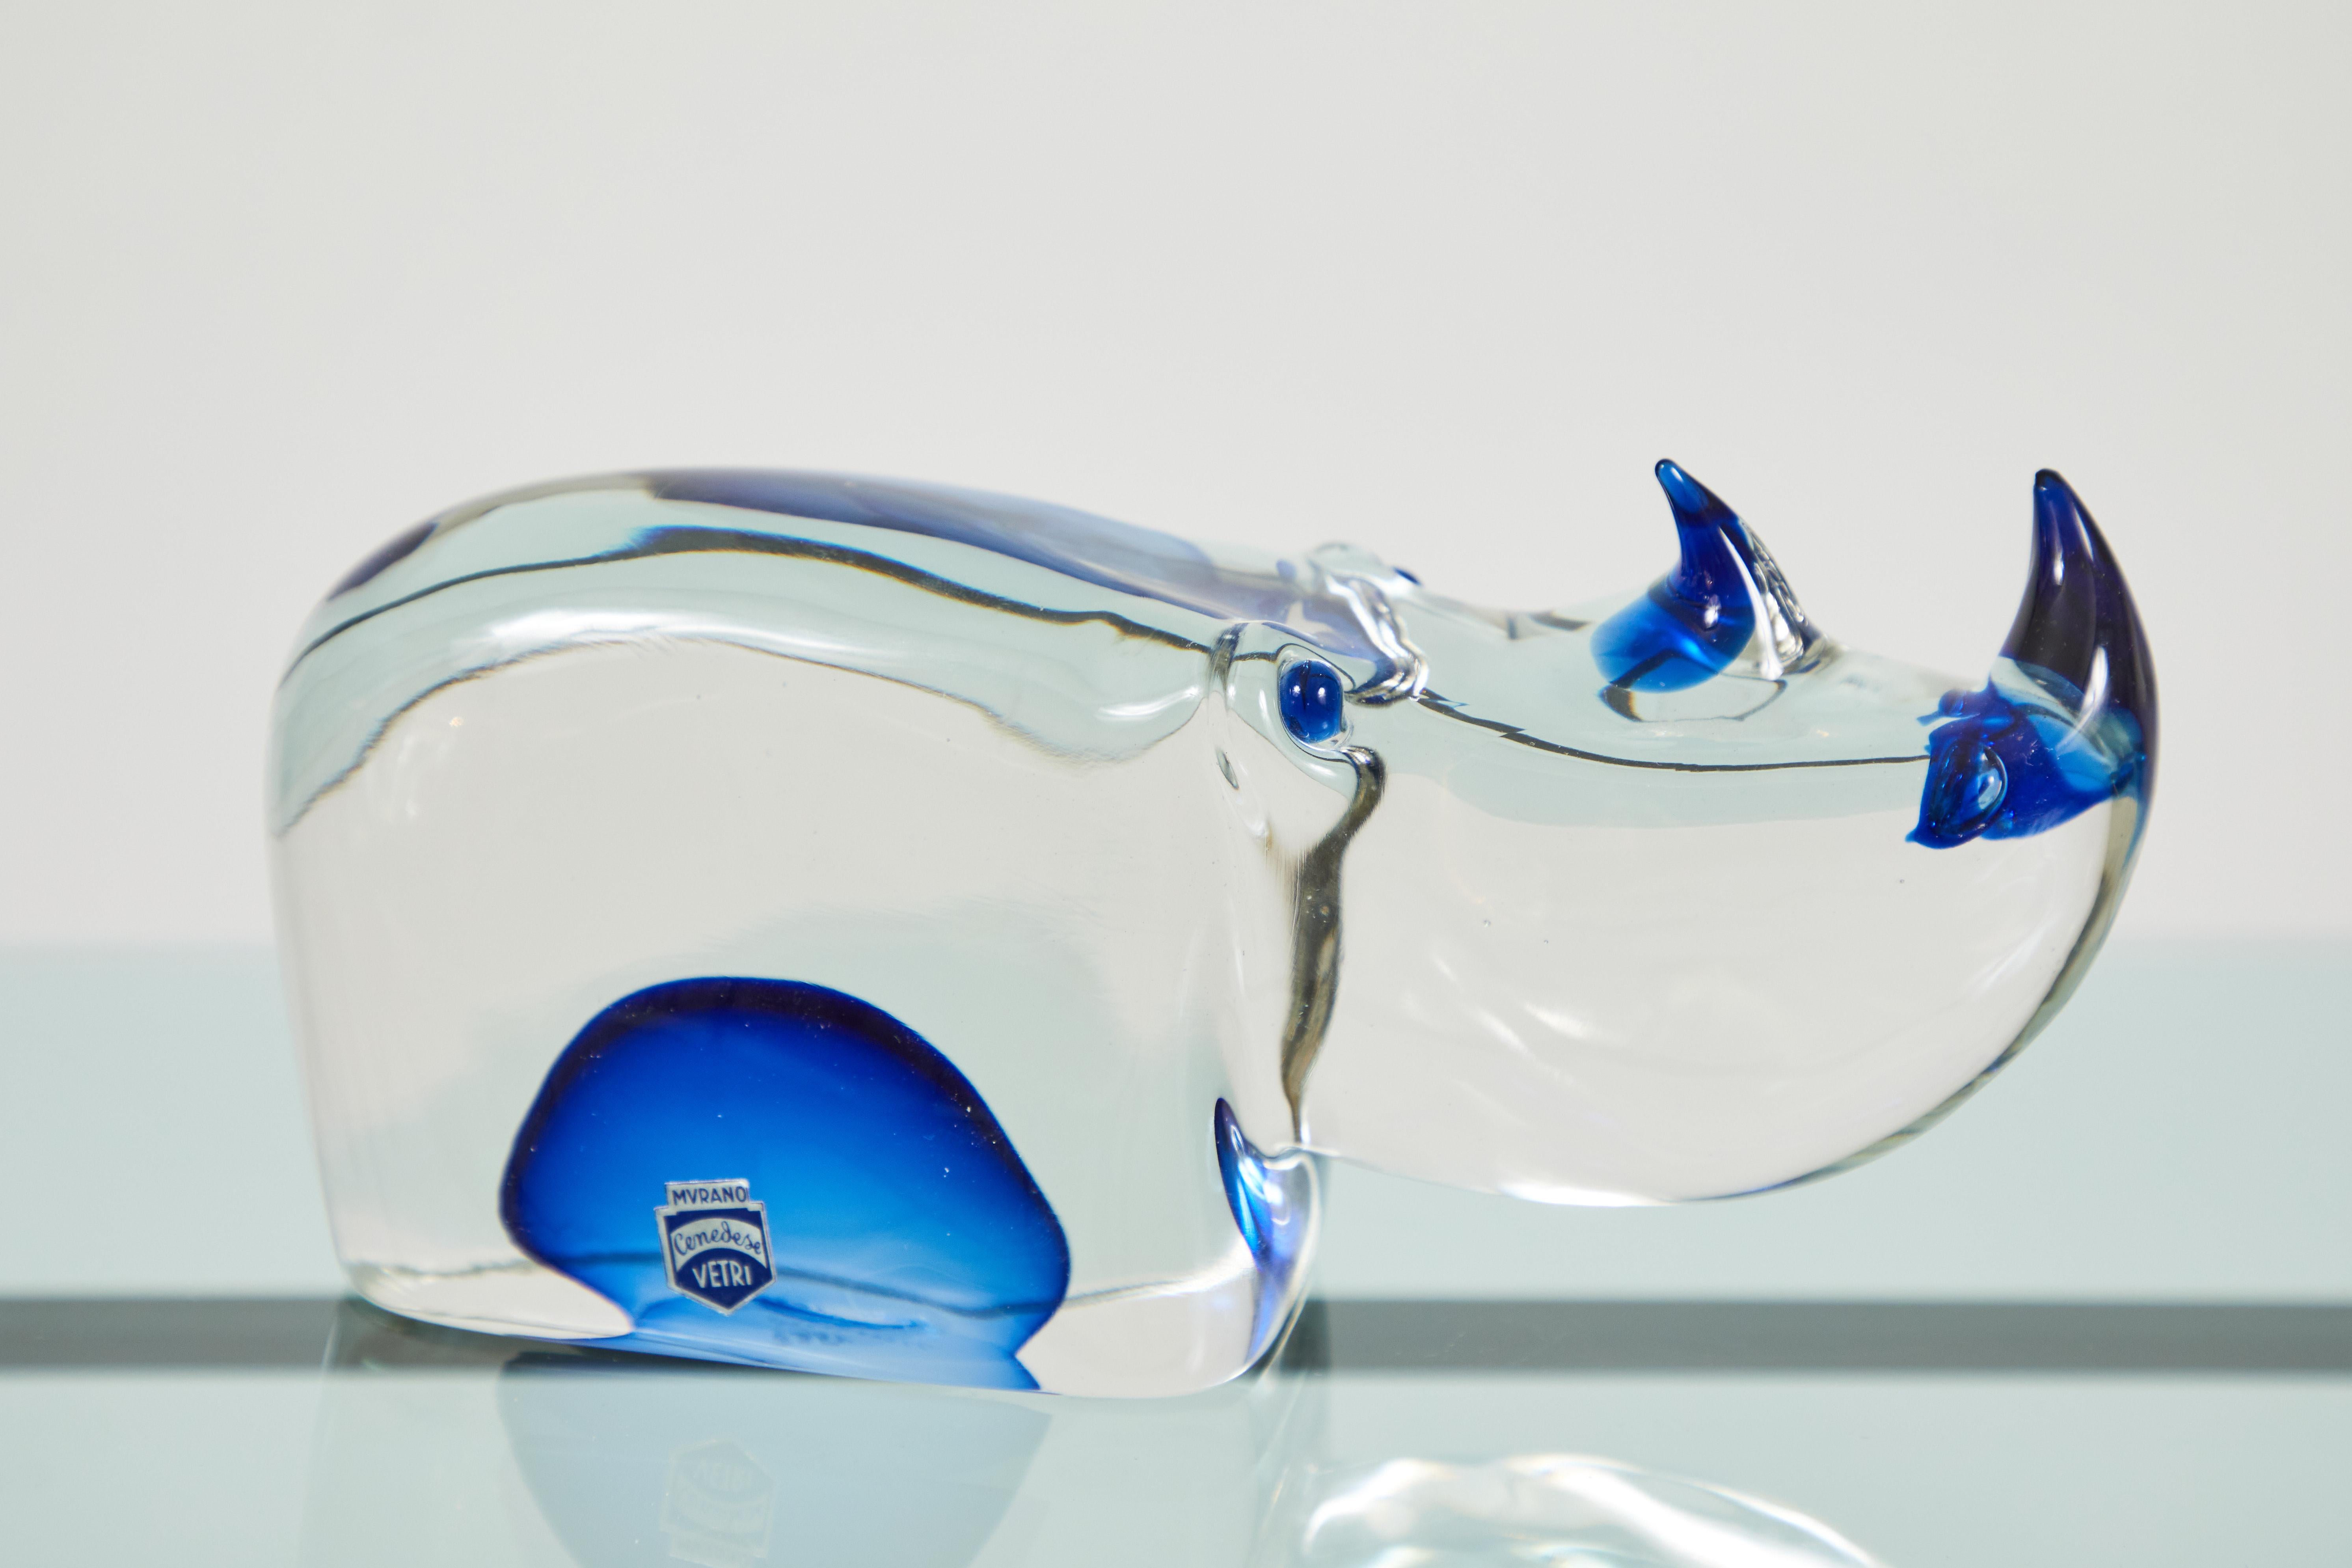 This is a beautifully blown, somerso Murano glass rhinoceros. This piece was designed by Antonio Da Ros and blown by Fabio Tosi for Cenedese Vetri. The horns, nostrils, eyes and belly feature a deep cobalt blue somerso glass. The piece is signed and